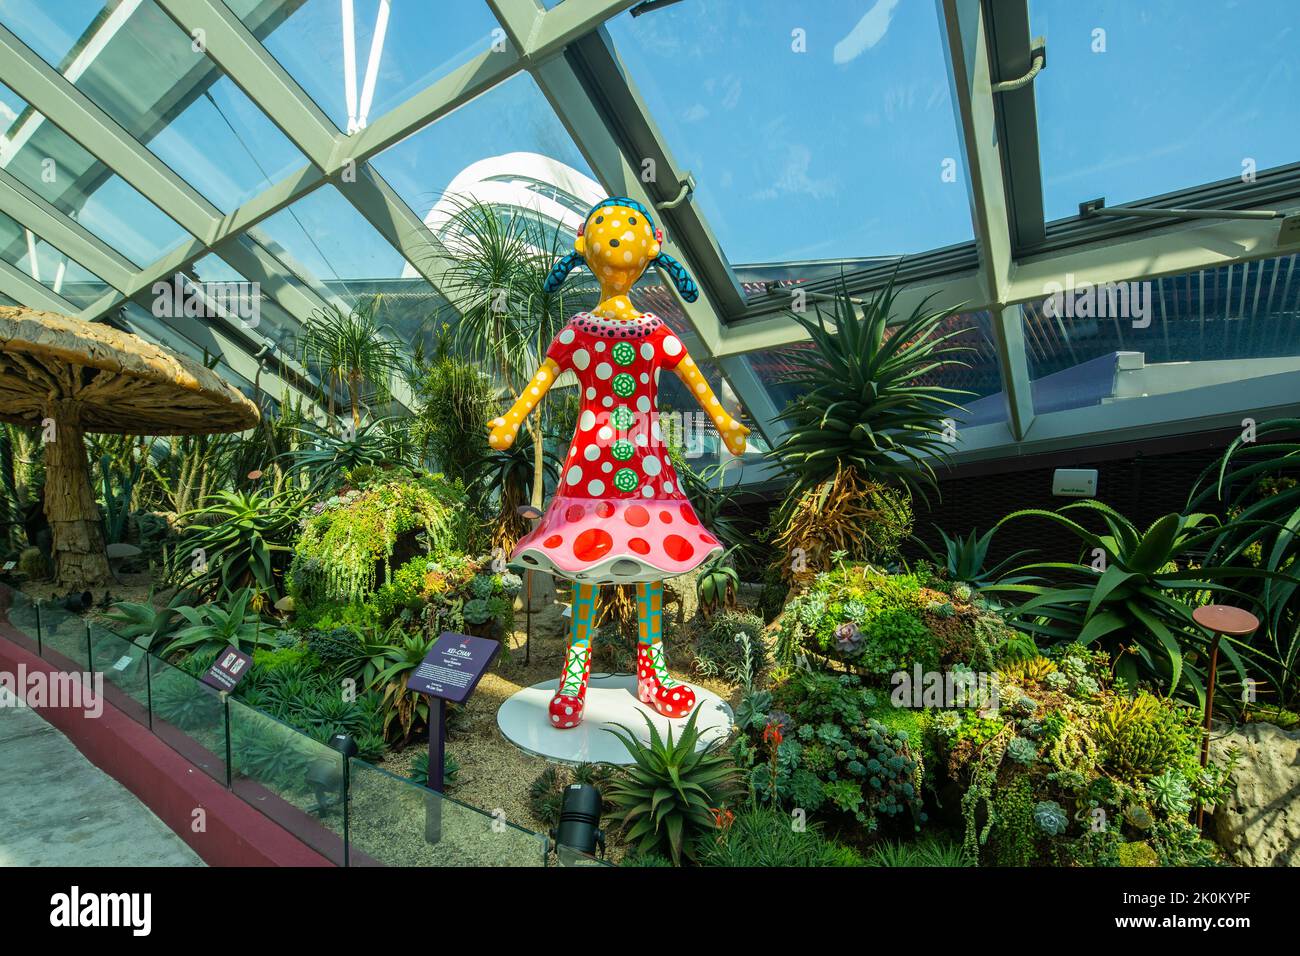 Yayoi Kusama sculpture, Kei-Chan. Placed inside Flower Dome at Gardens by the Bay. Singapore, Southeast Asia Stock Photo